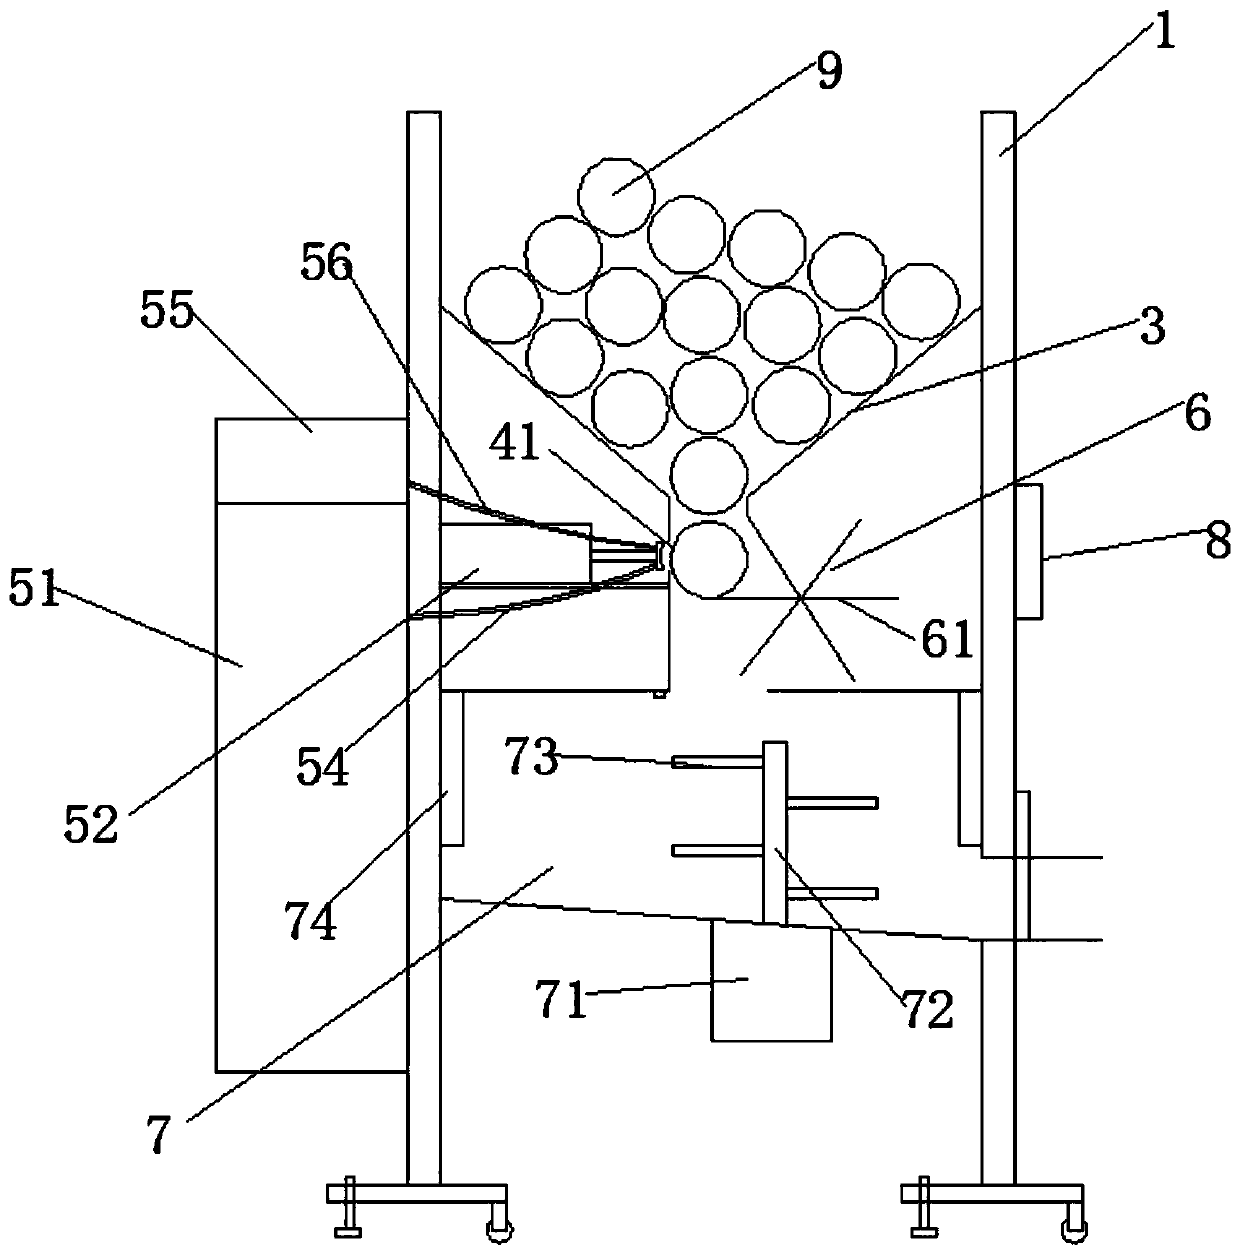 Sphere code spraying and counting device